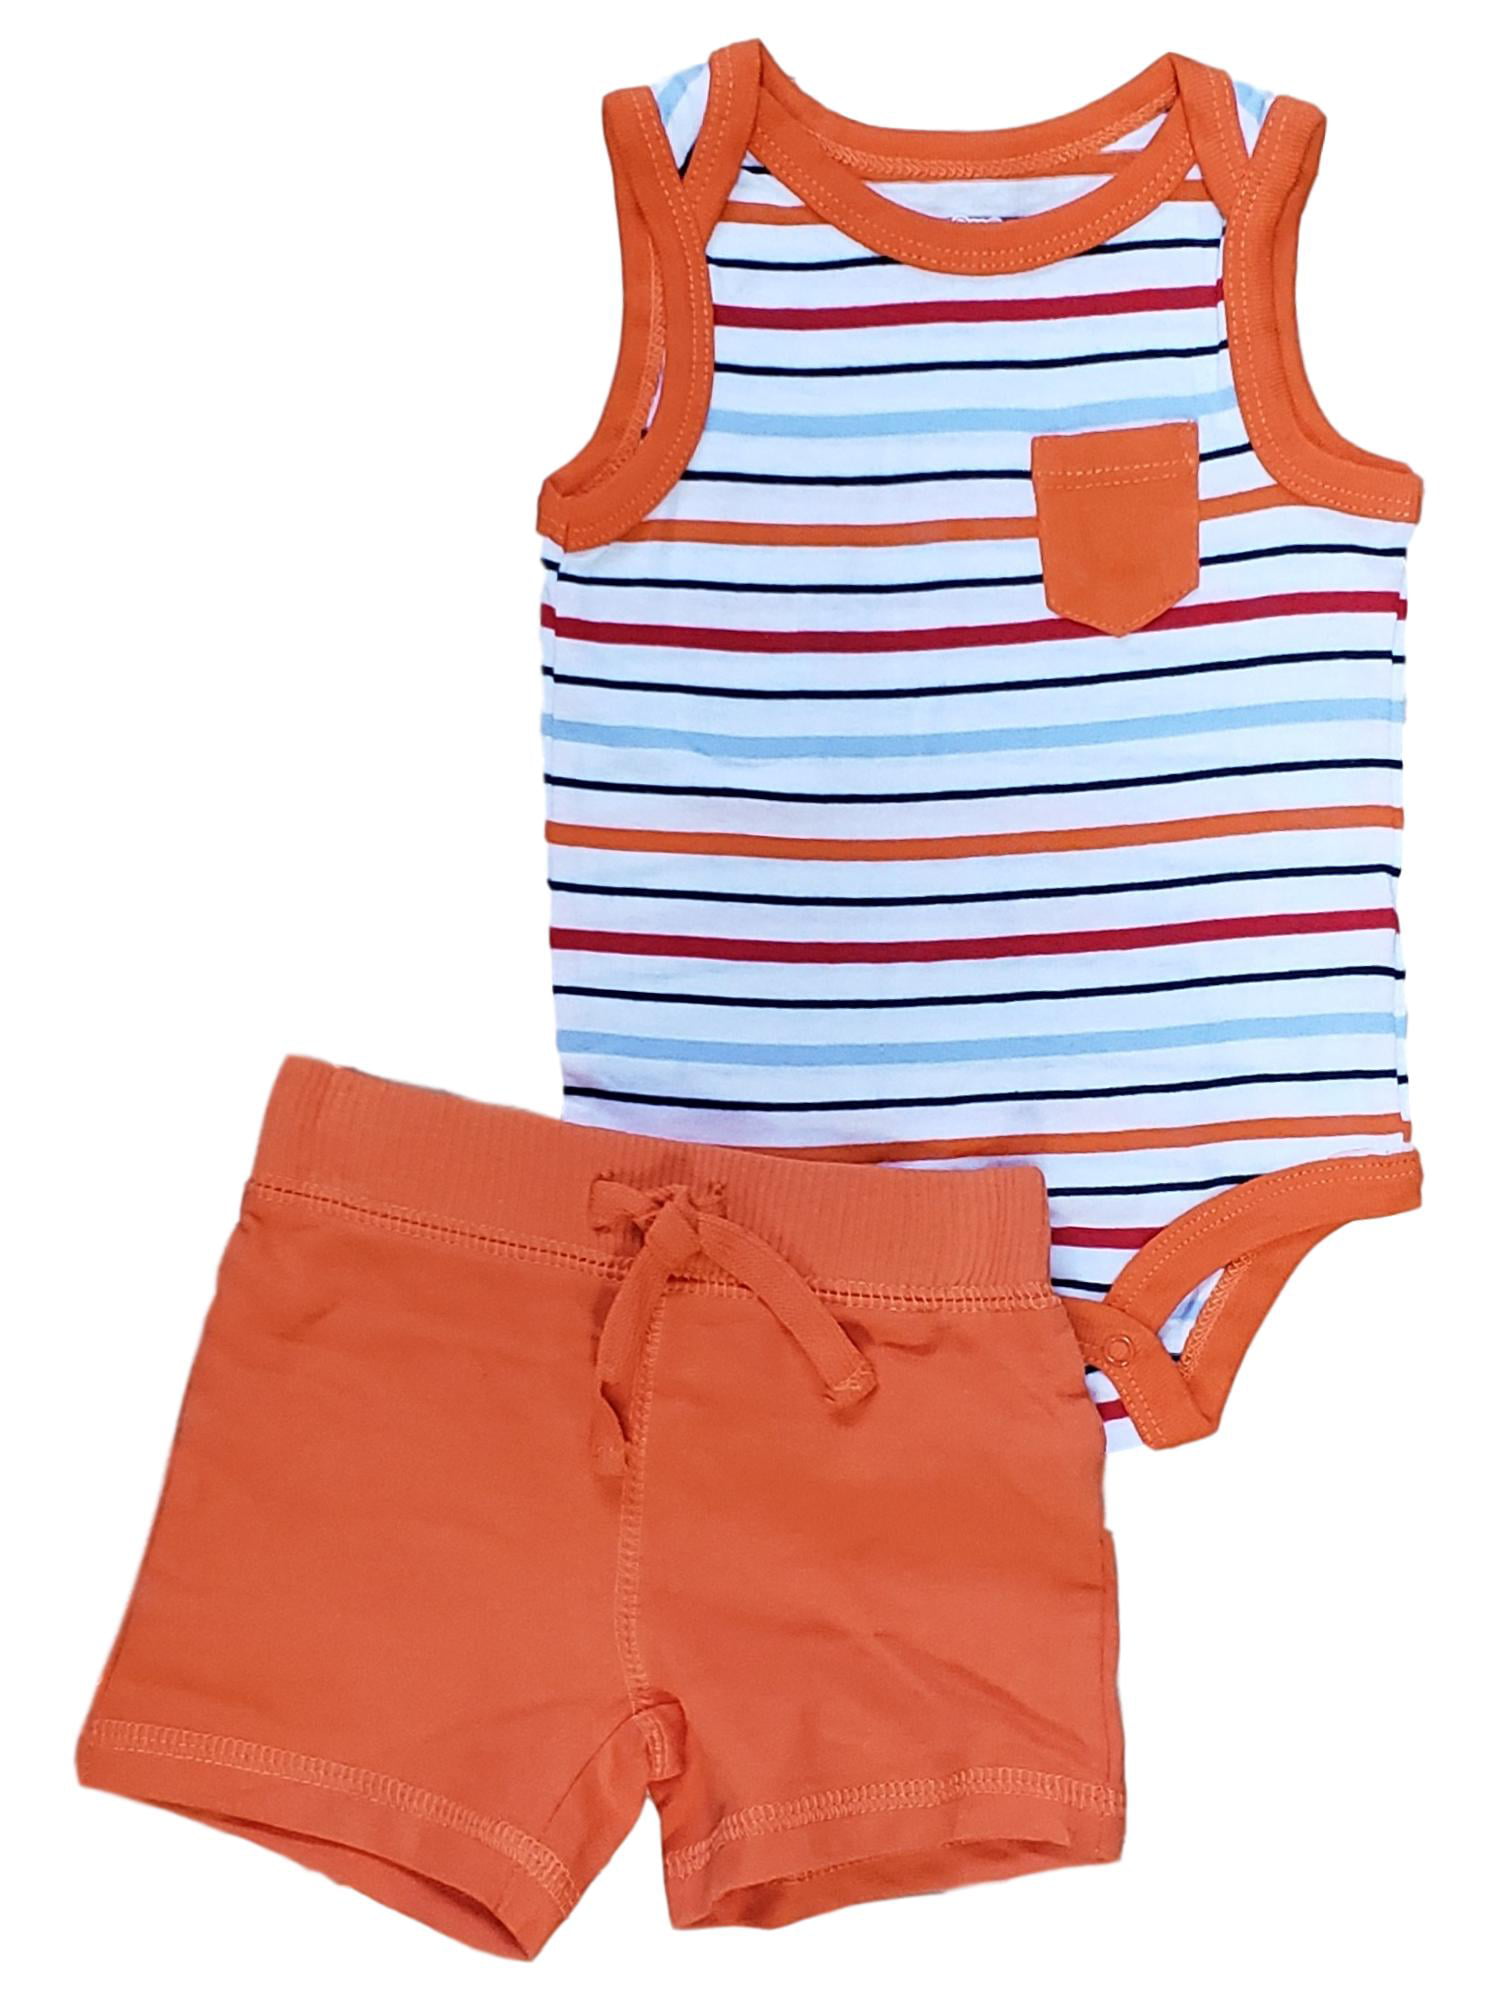 2-Piece Bodysuit and Shorts Set for Baby